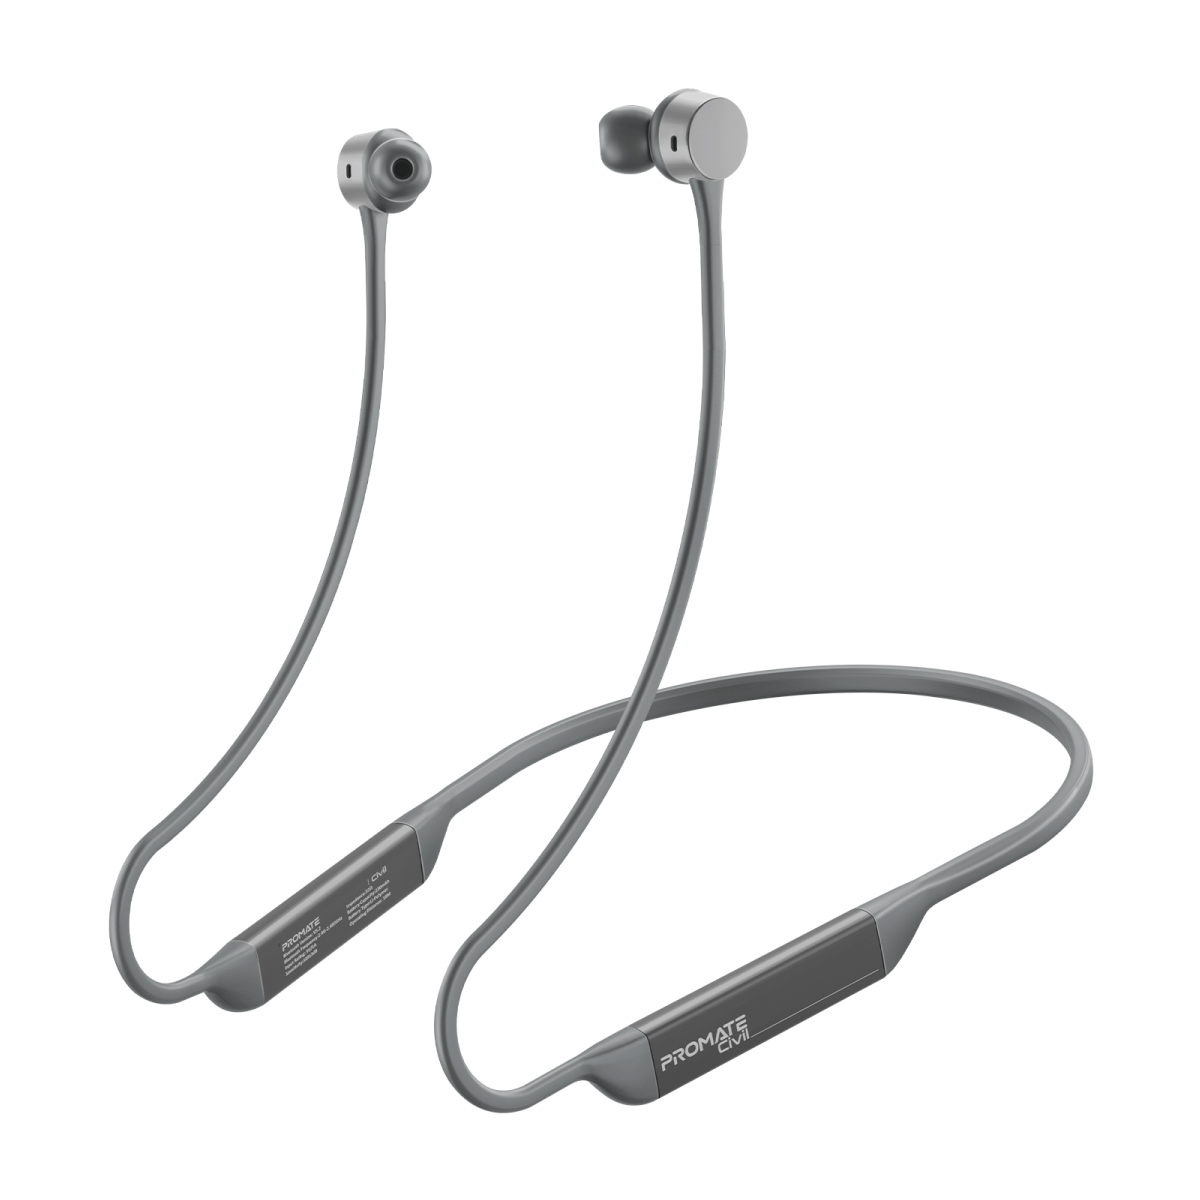 Promate Wireless Neckband Earphones, Hi-Fi Lightweight Wireless Bluetooth Earphones with Anti-Slip Liquid Silicone Neckband, Hall Switch Sensor, 24H Playtime and In-Line Controls for iPhone 14, Galaxy S23, Civil.SILVER